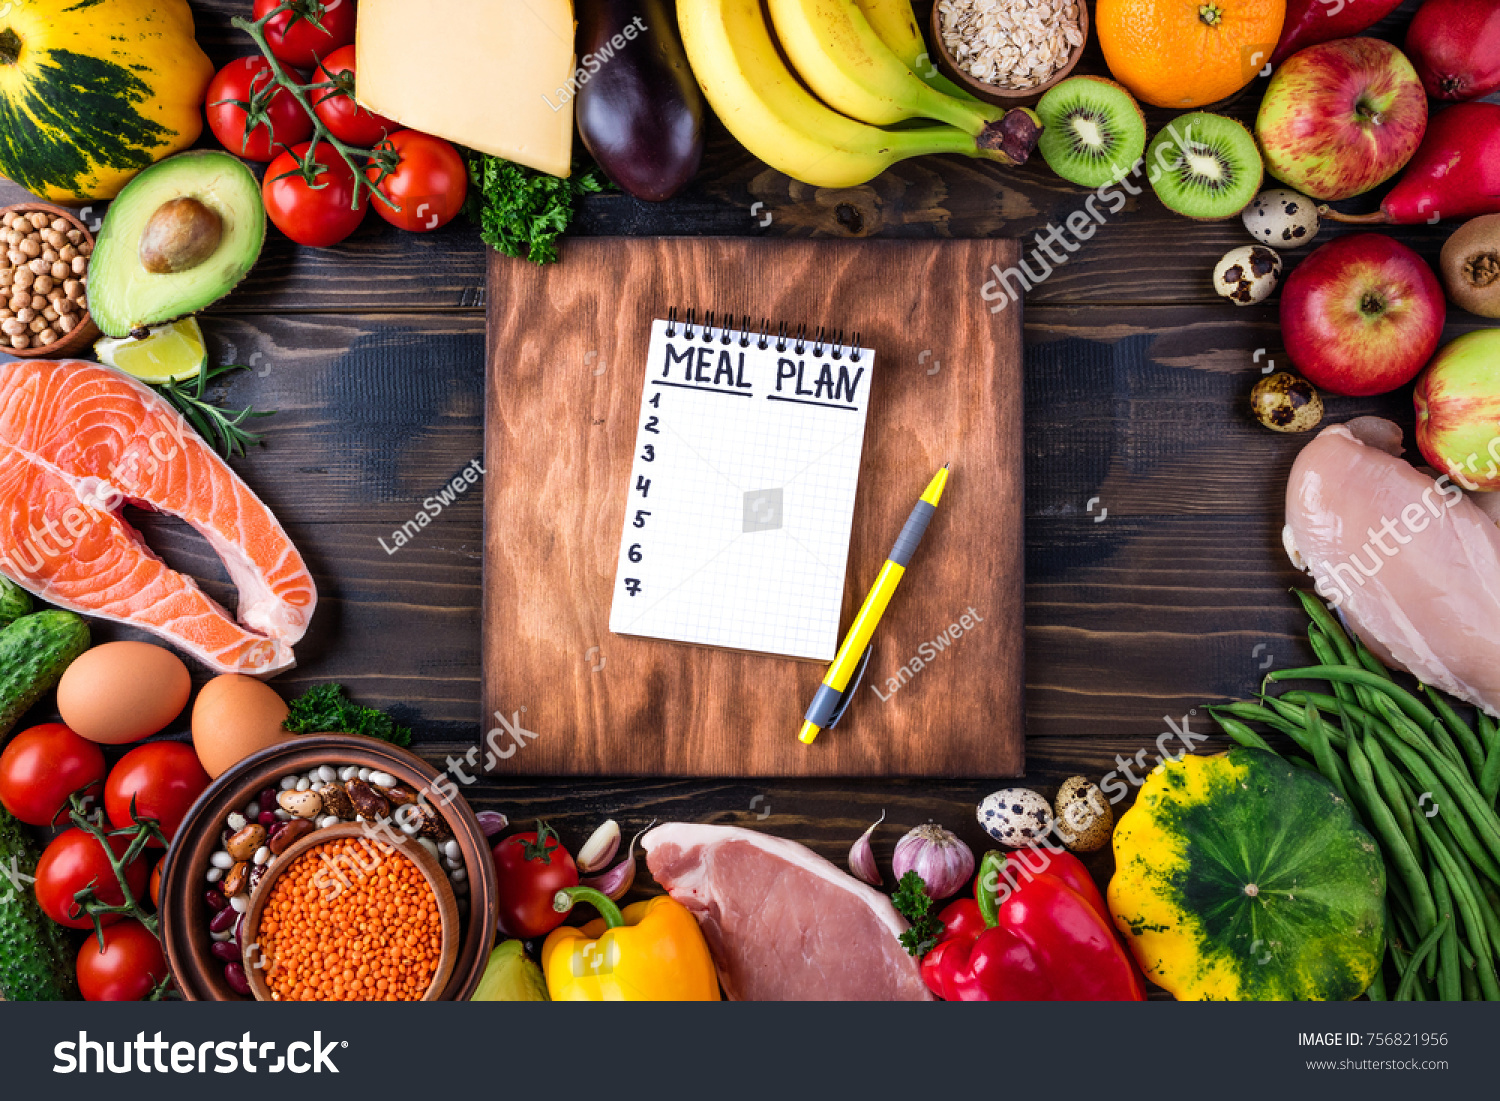 Healthy food concept. Fresh  vegetables, fruits, meat and fish on wooden table. Healthy eating and meal plan. Top view #756821956